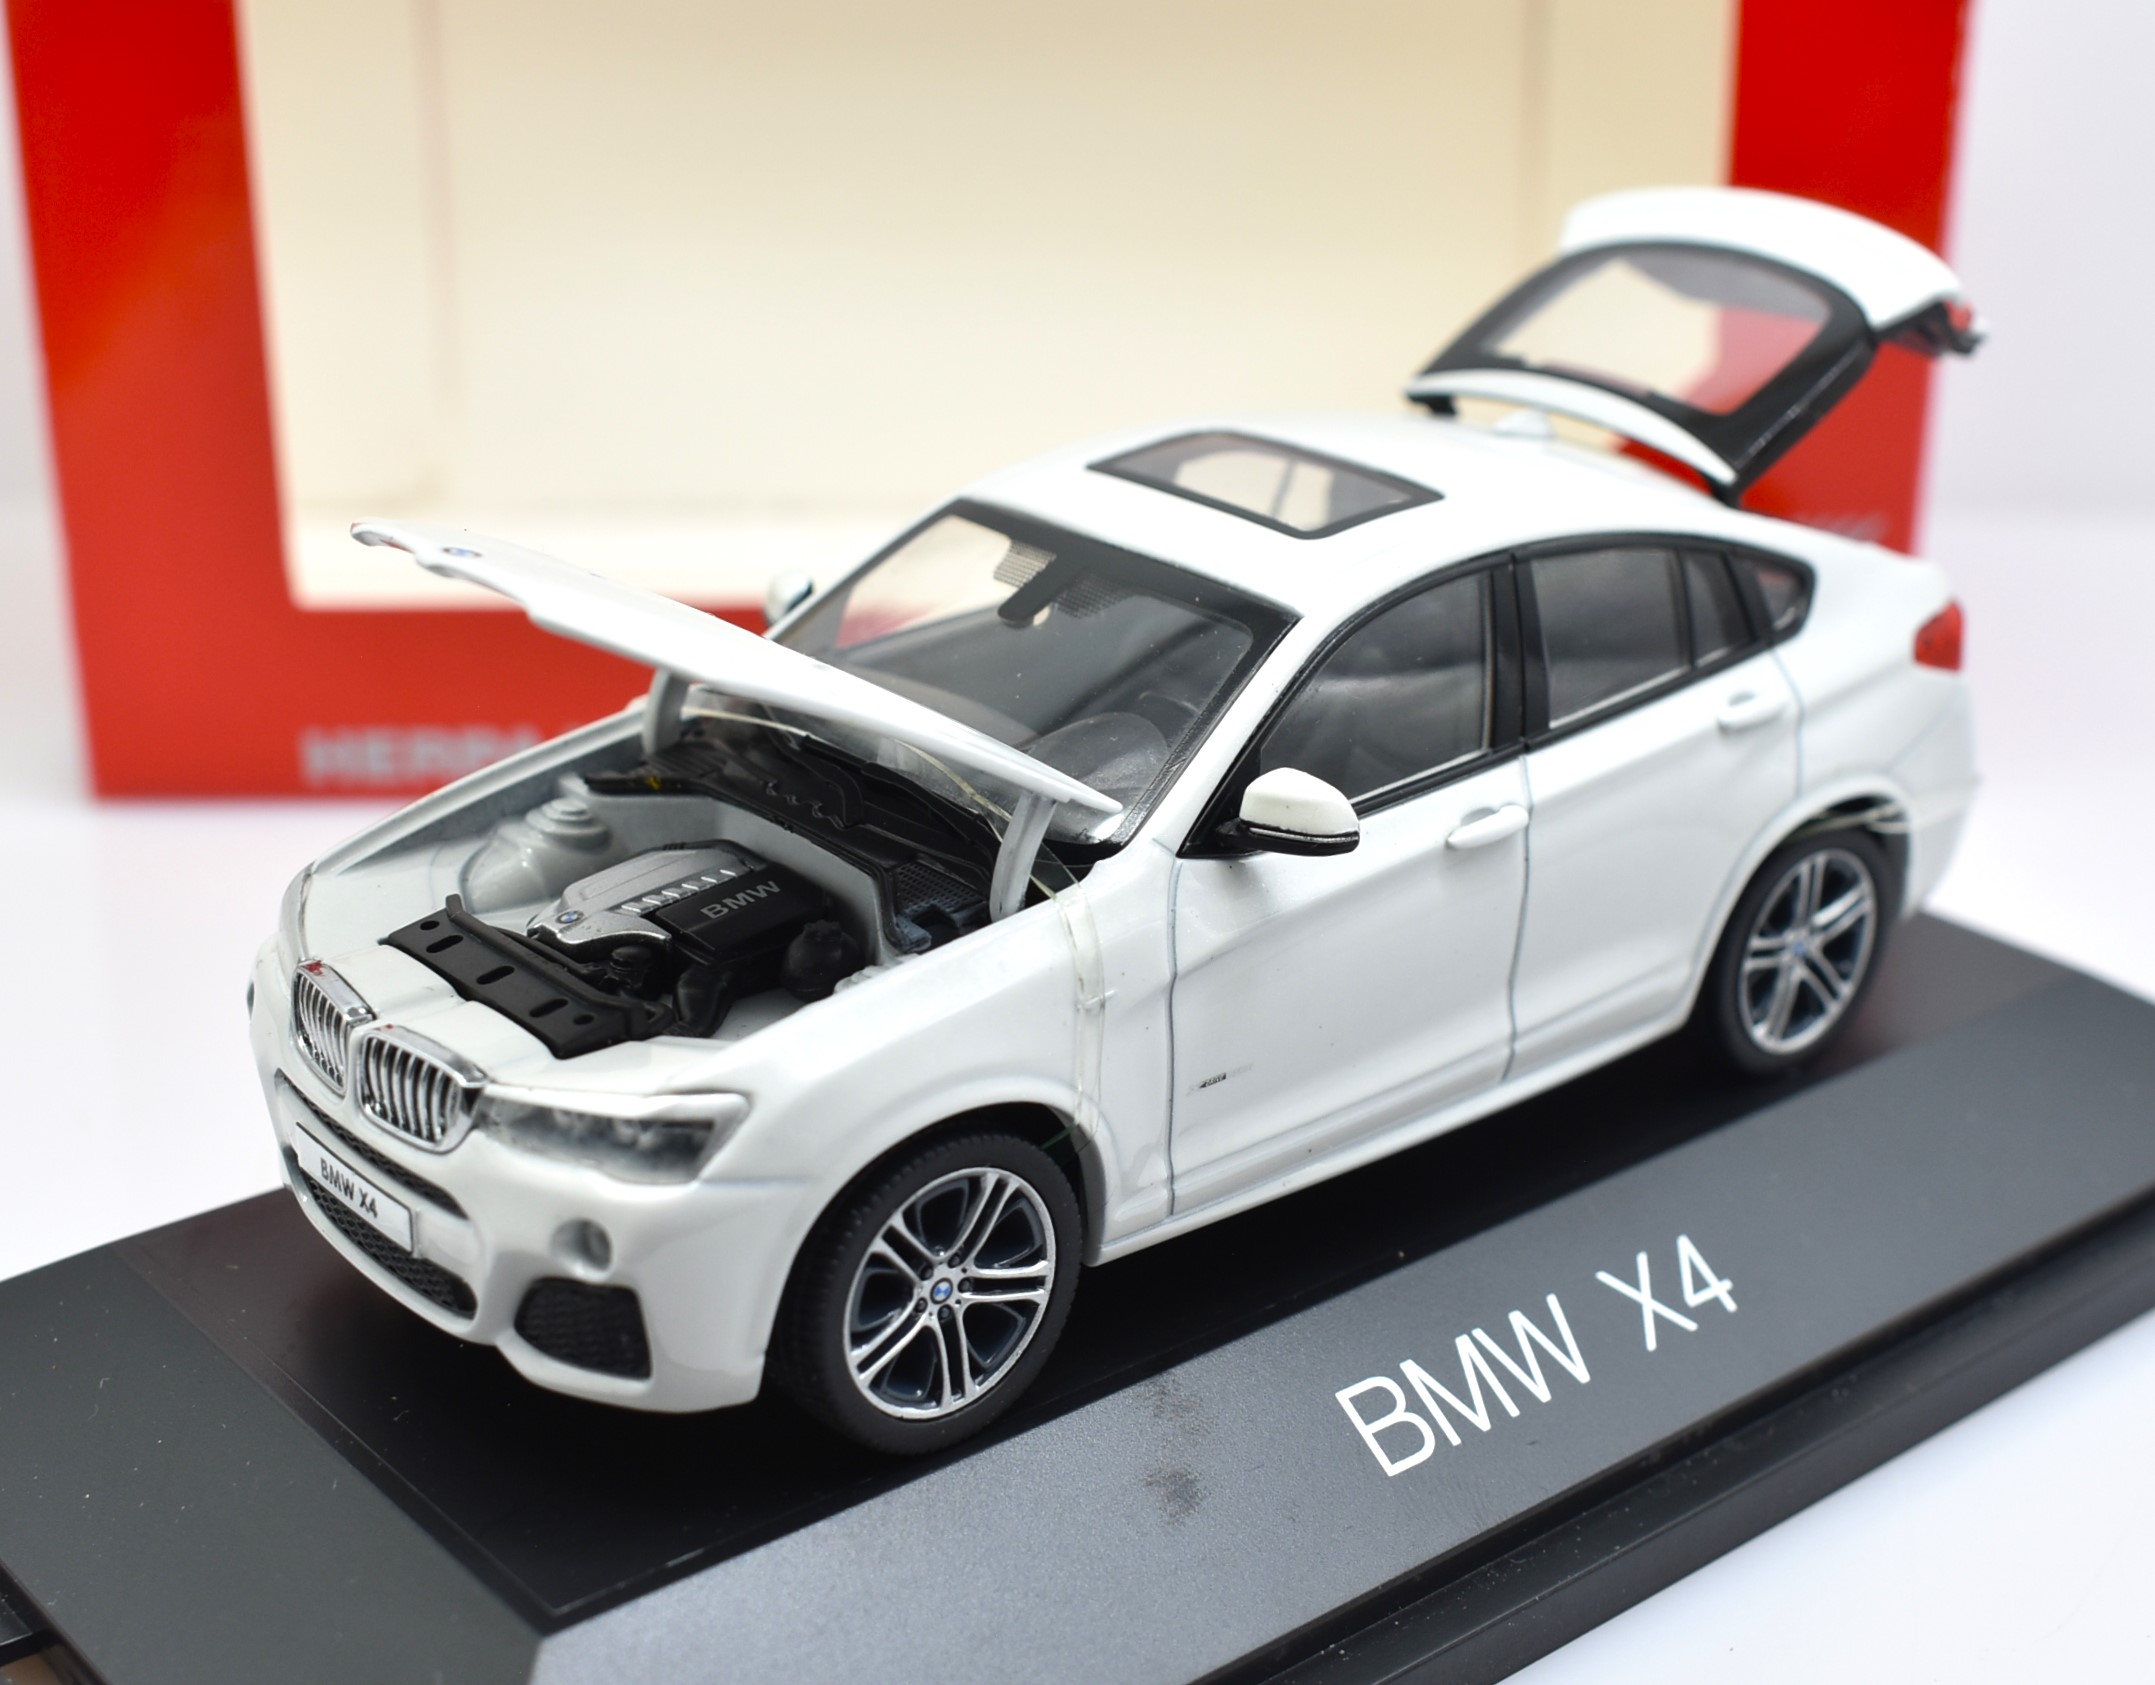 Model car 1:43 scale BMW X4 white Herpa diecast vehiclescollection